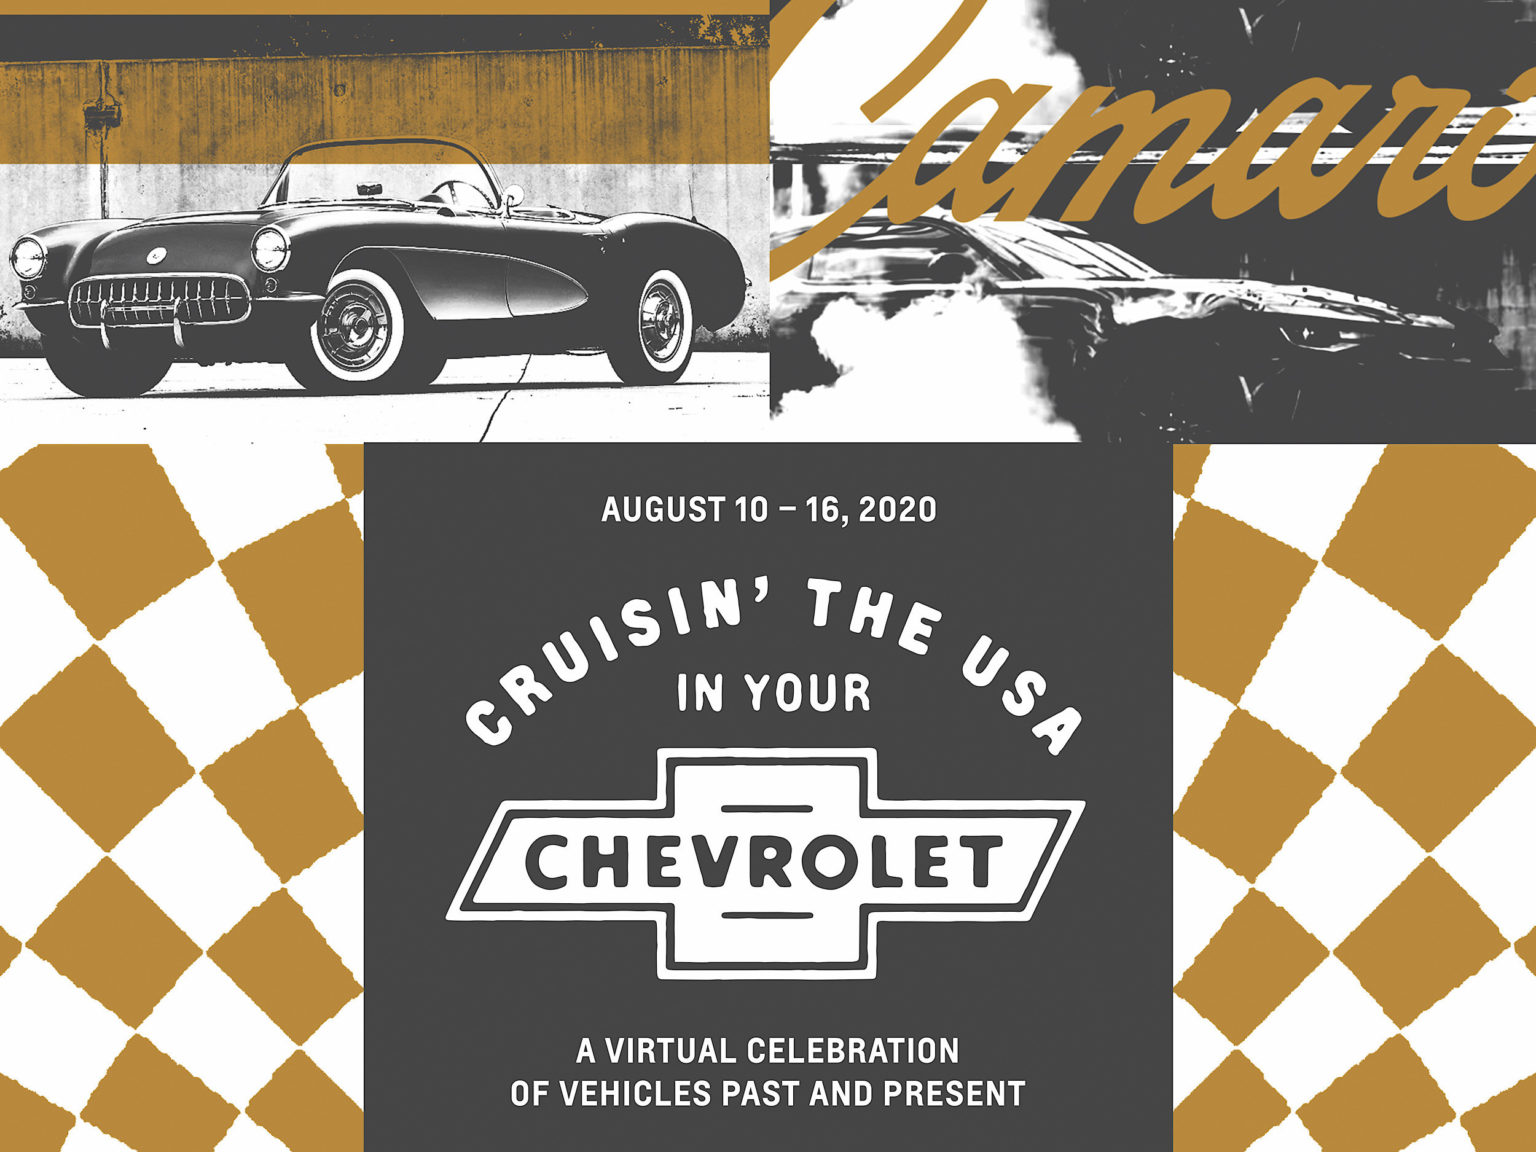 A new Chevrolet festival will feature the history of the Chevy brand.